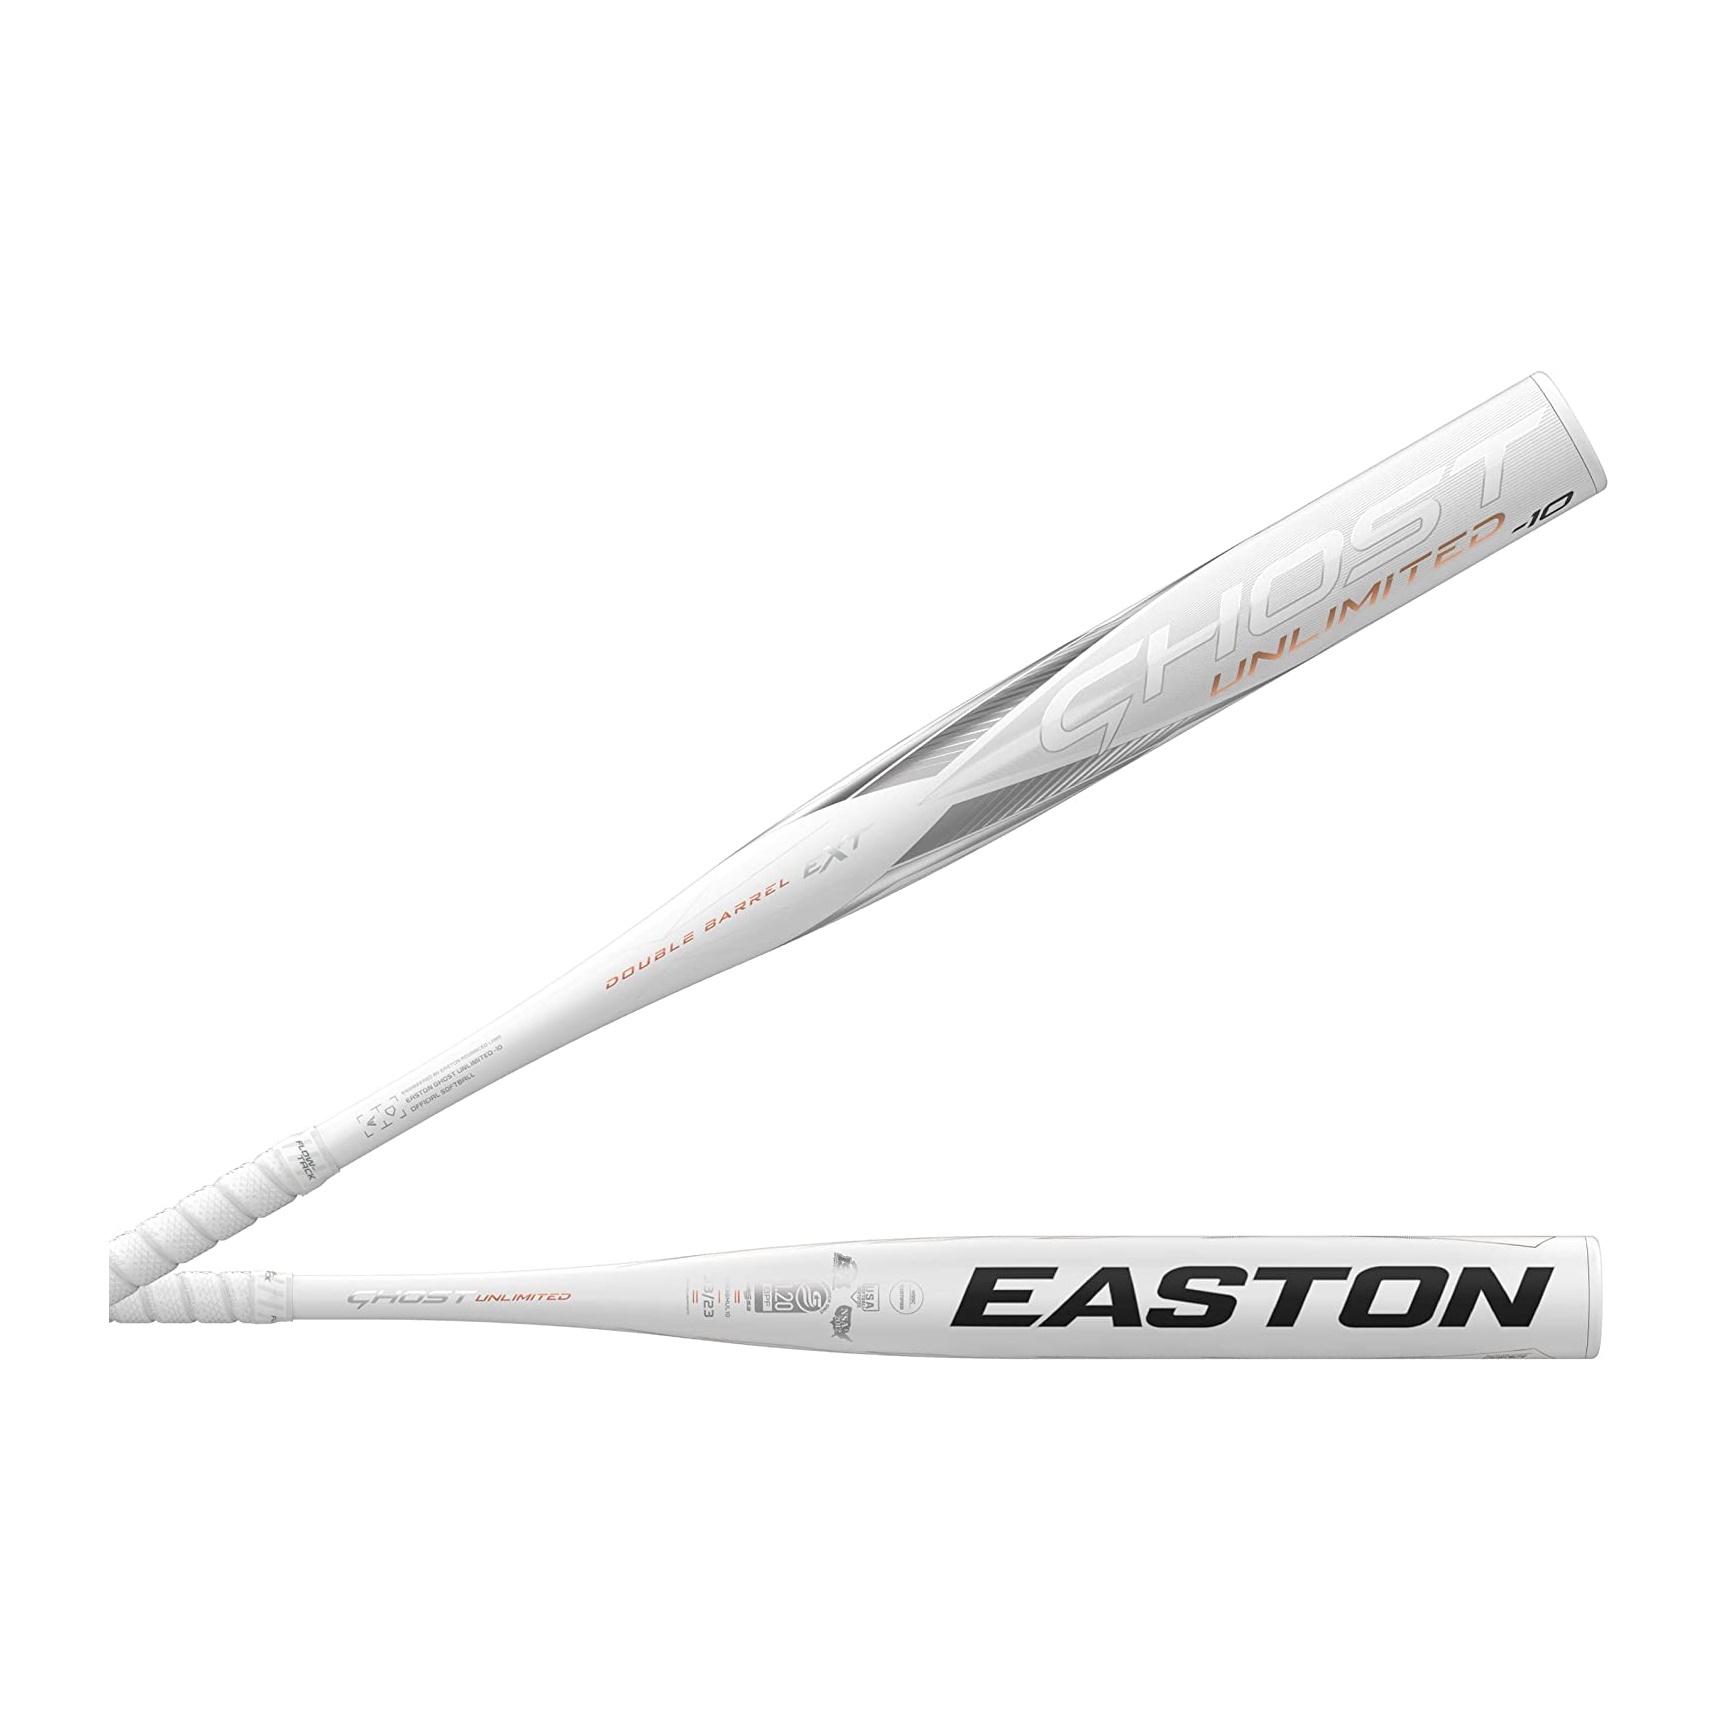 easton-ghost-unlimited-fp23ghul-11-fastpitch-softball-bat-32-inch-21-oz FP23GHUL11-3221 Easton 628412416105 Introducing the Easton Ghost Unlimited Fastpitch Softball Bat a true game-changer